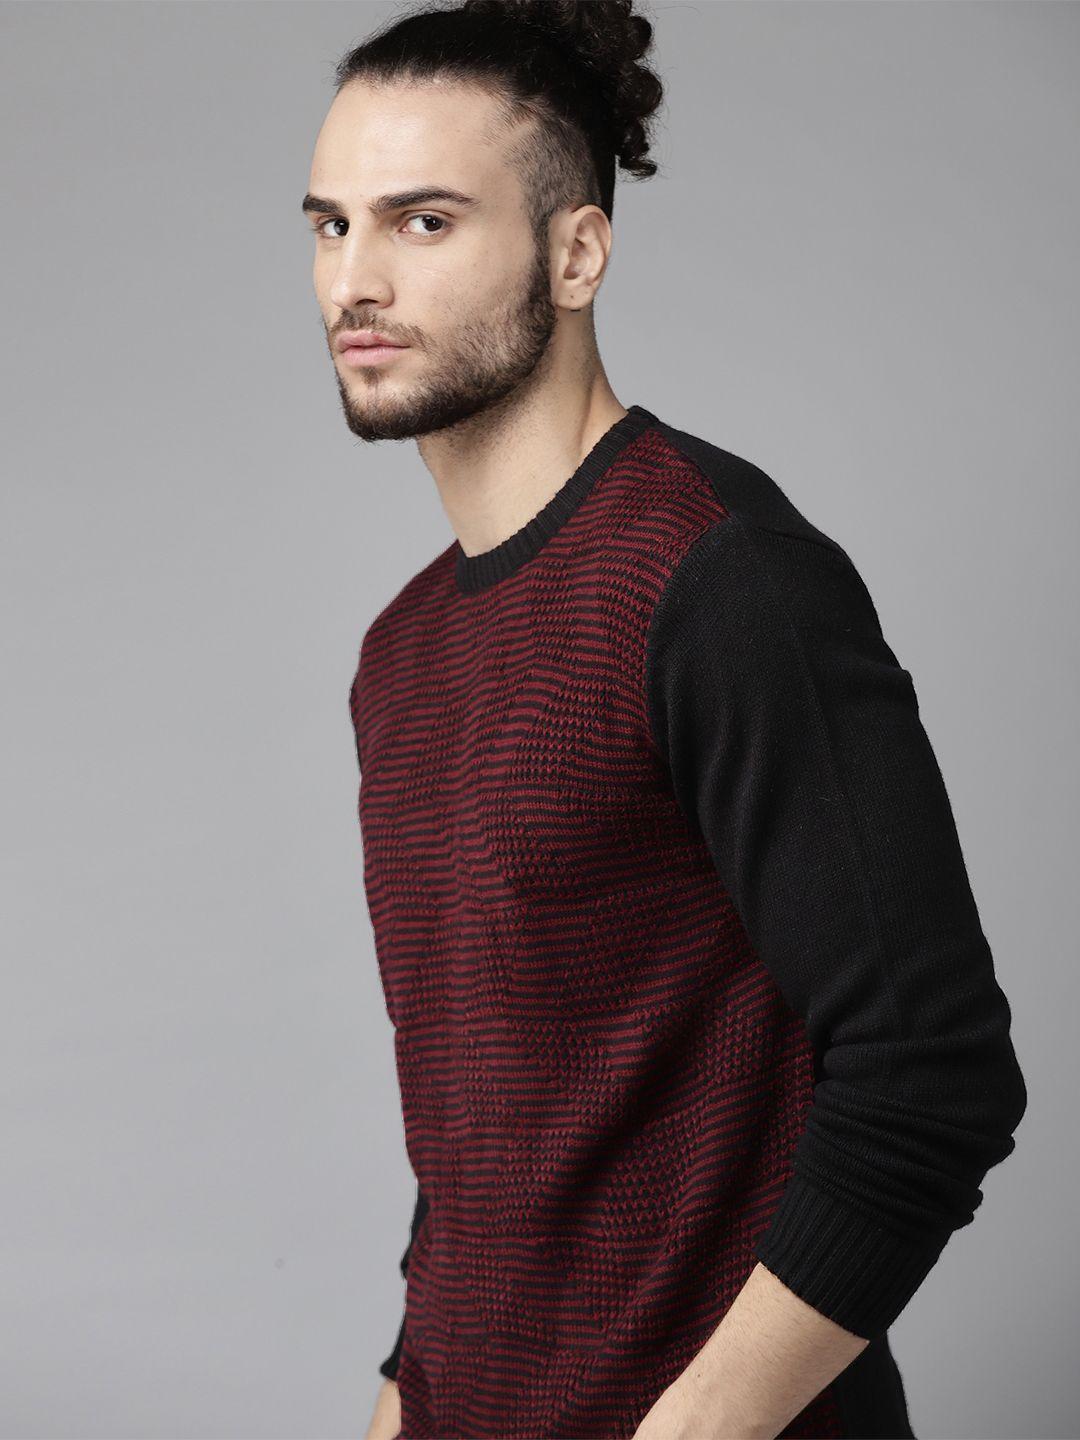 the roadster lifestyle co men maroon & black self-designed pullover sweater